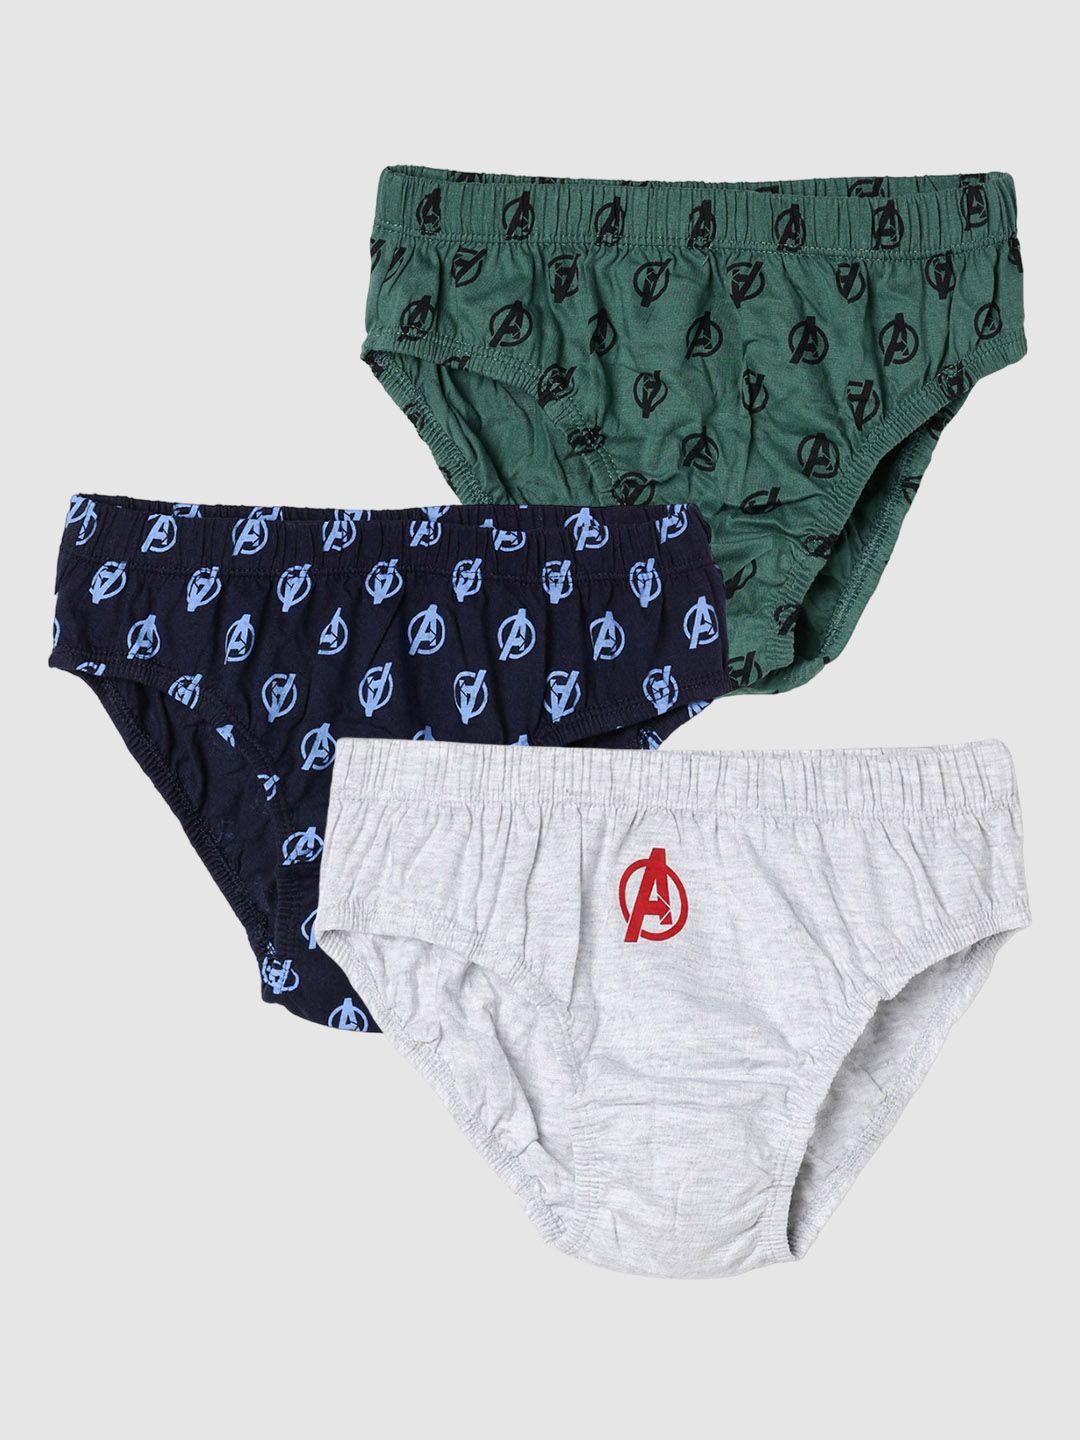 max boys pack of 3 avengers printed cotton basic briefs 1000013023428